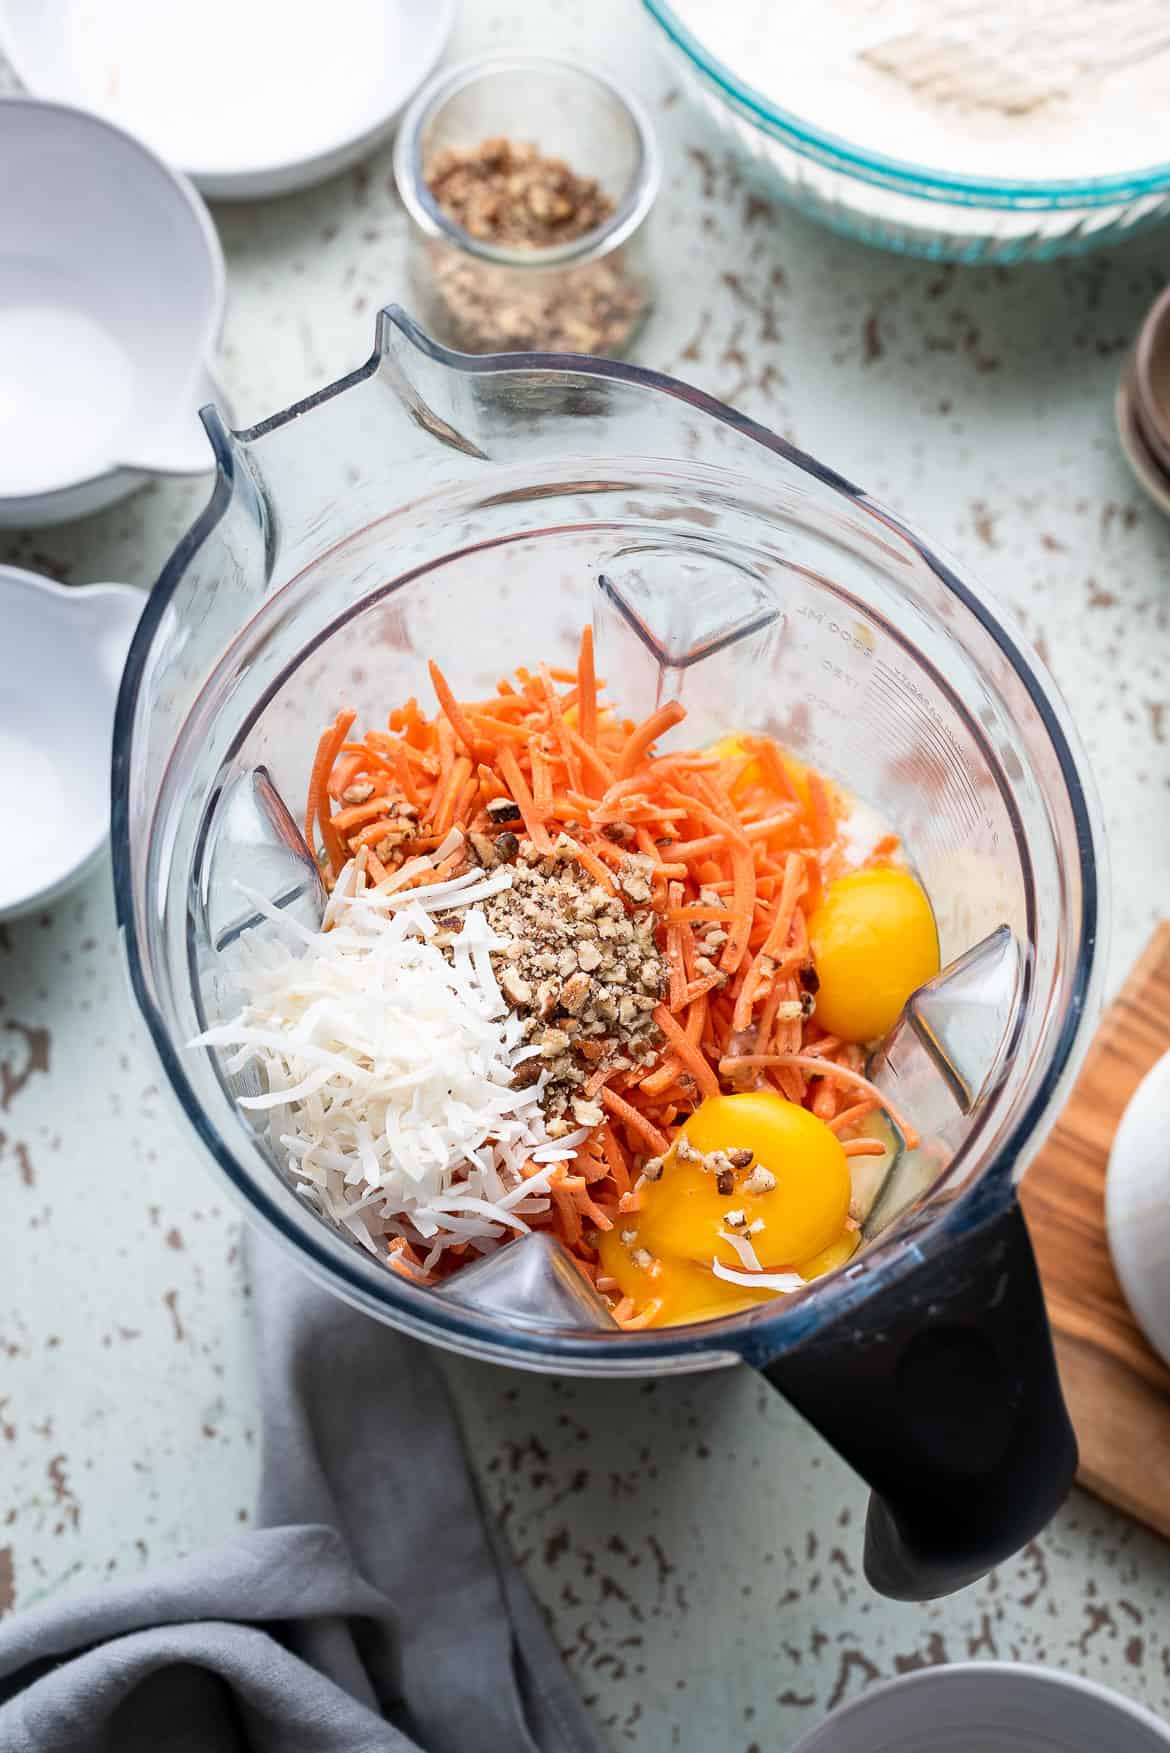 Ingredients for Carrot Cake Waffles in a blender